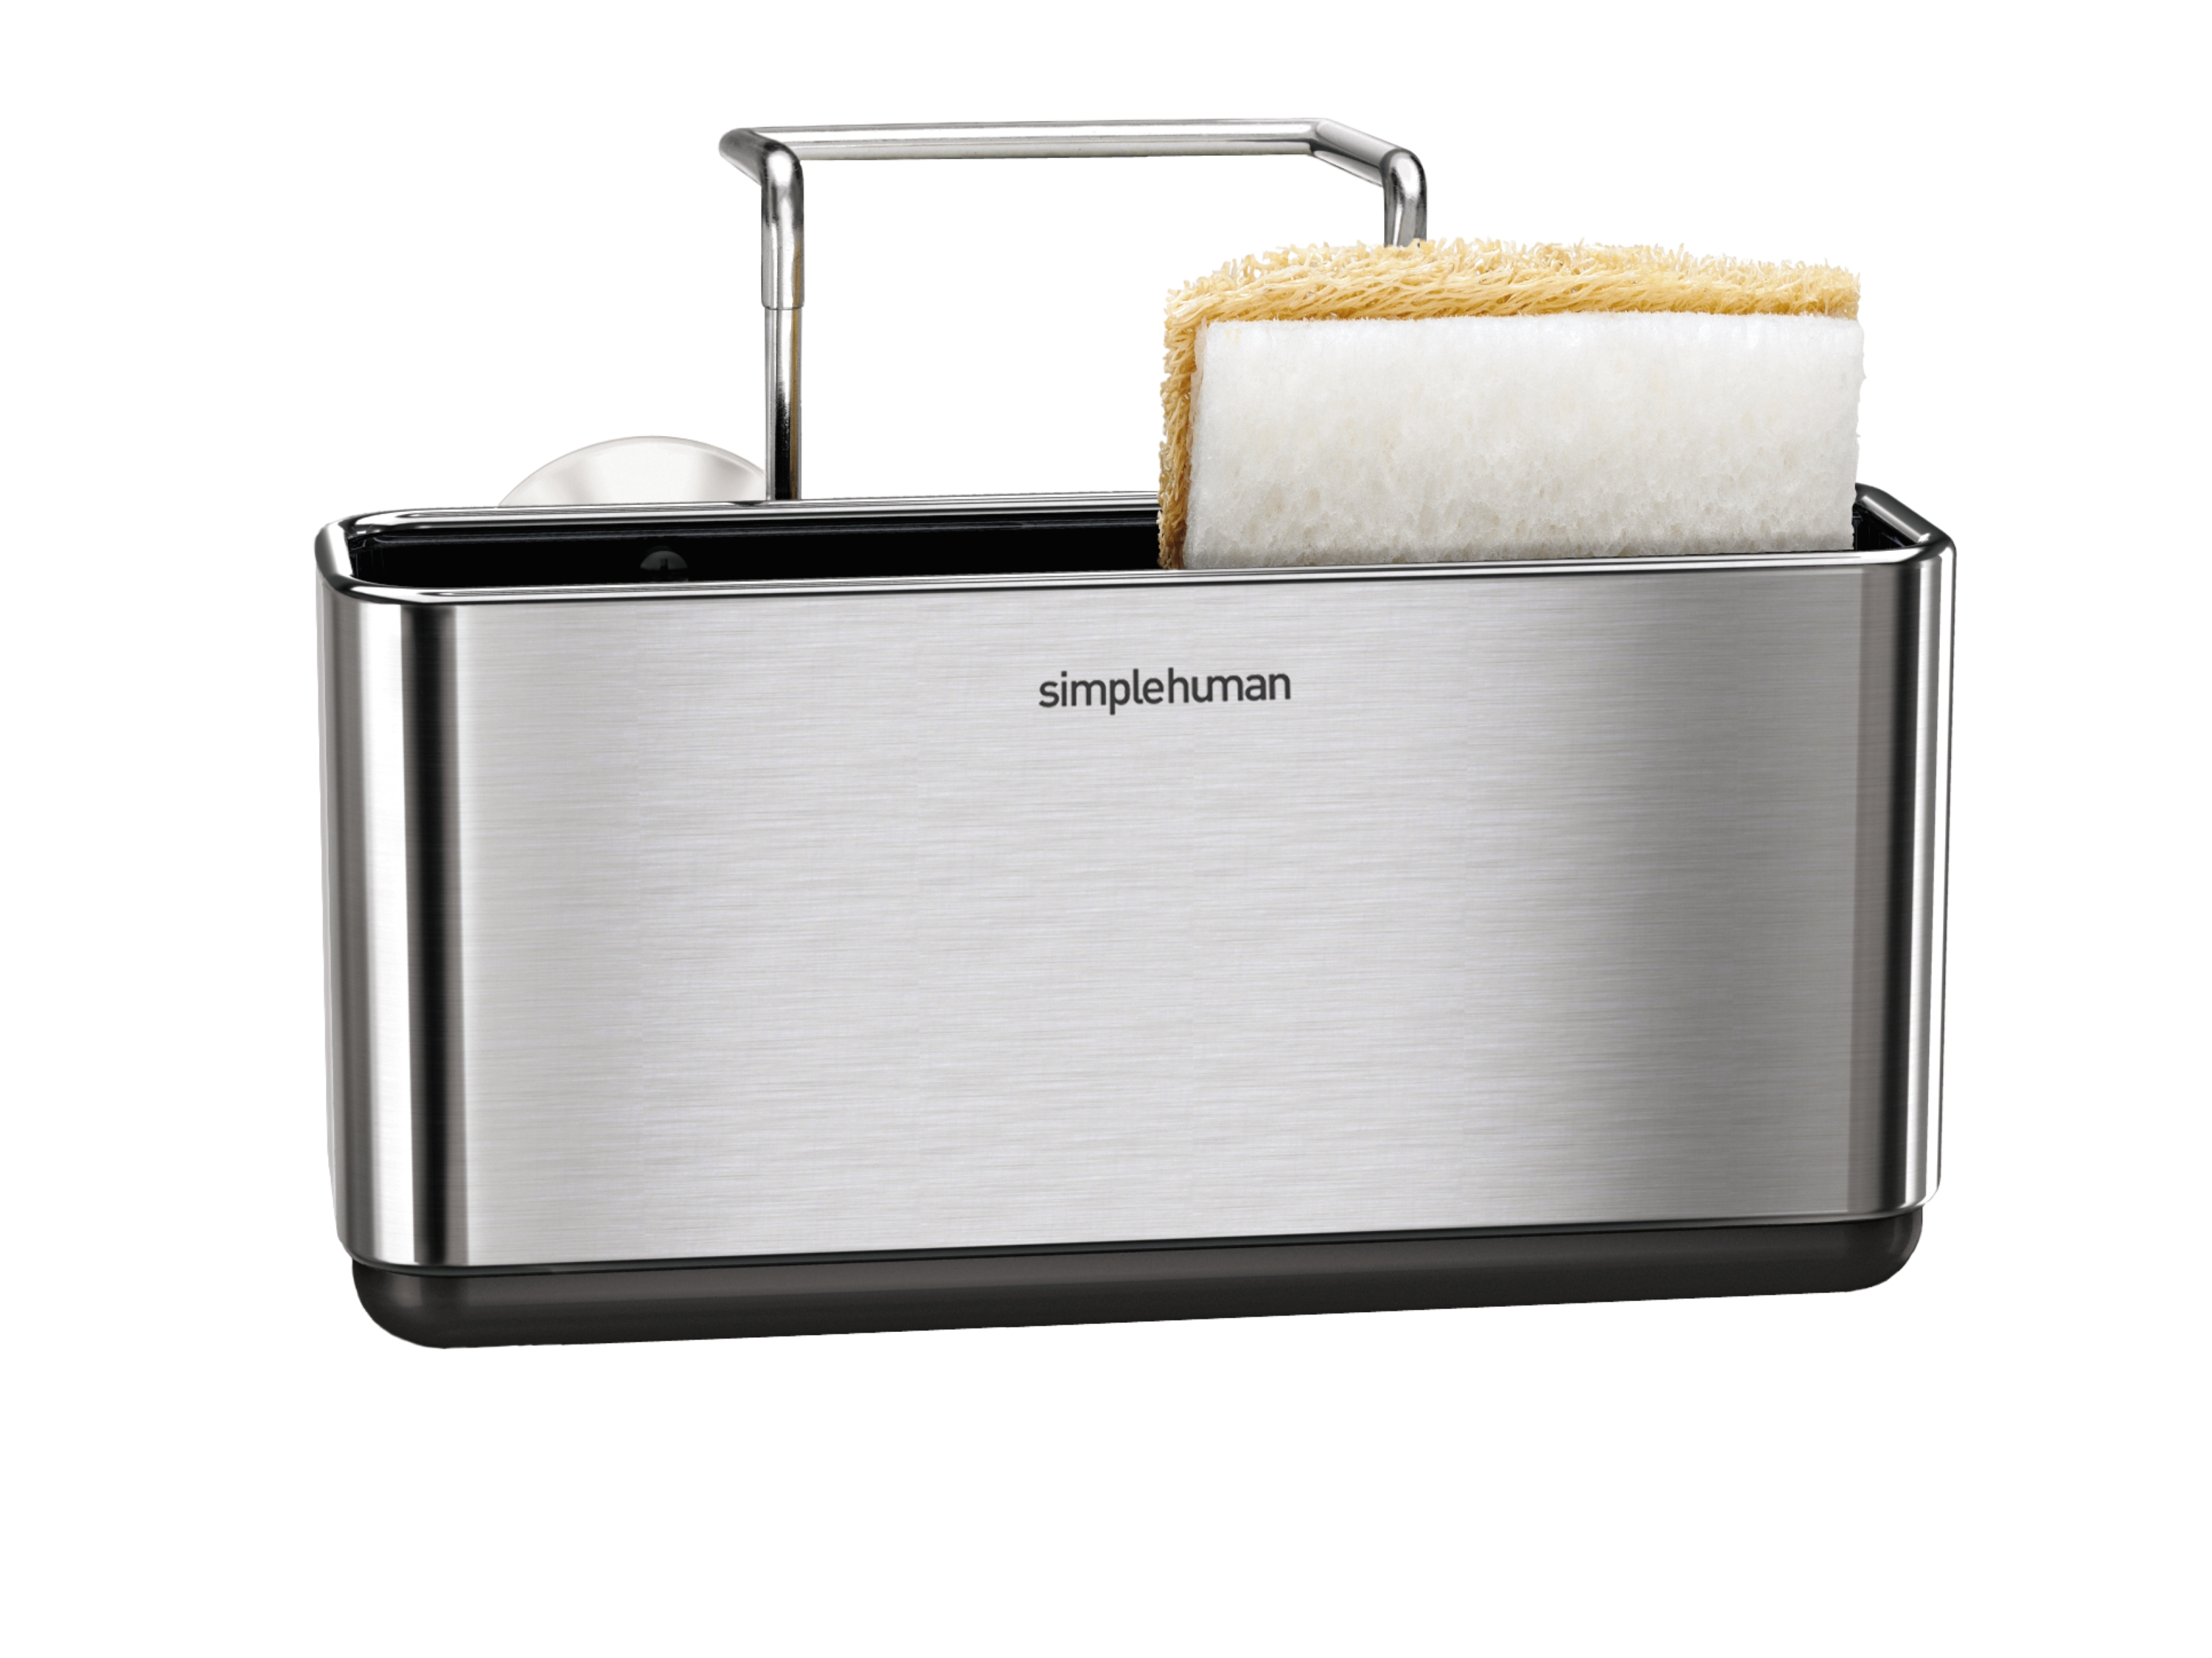 simplehuman Slim Sink Caddy, Brushed Stainless Steel - image 1 of 4